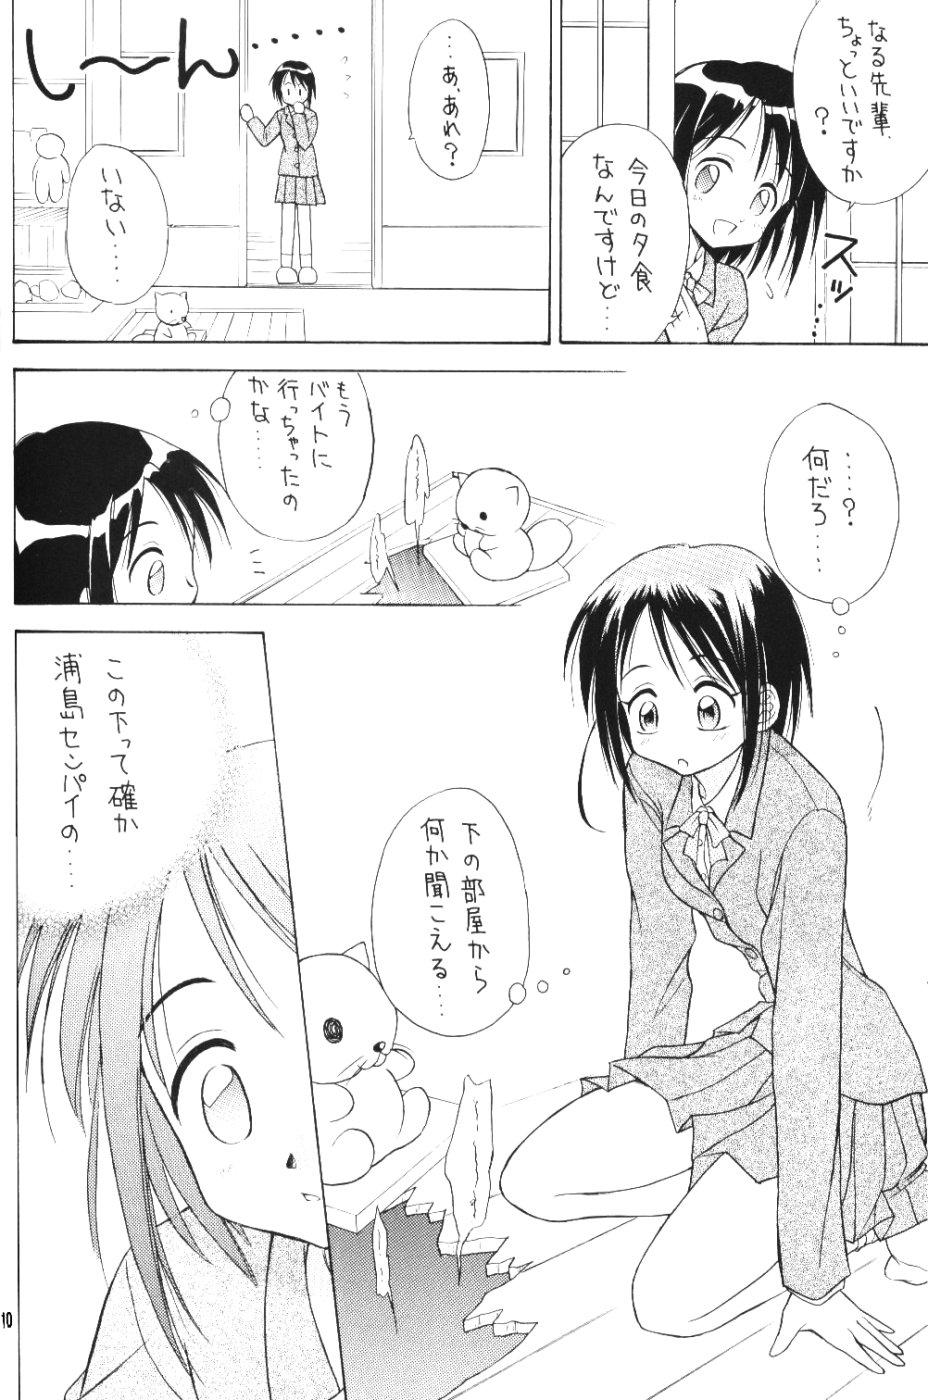 Stunning Lovely 4 - Love hina Babes - Page 9